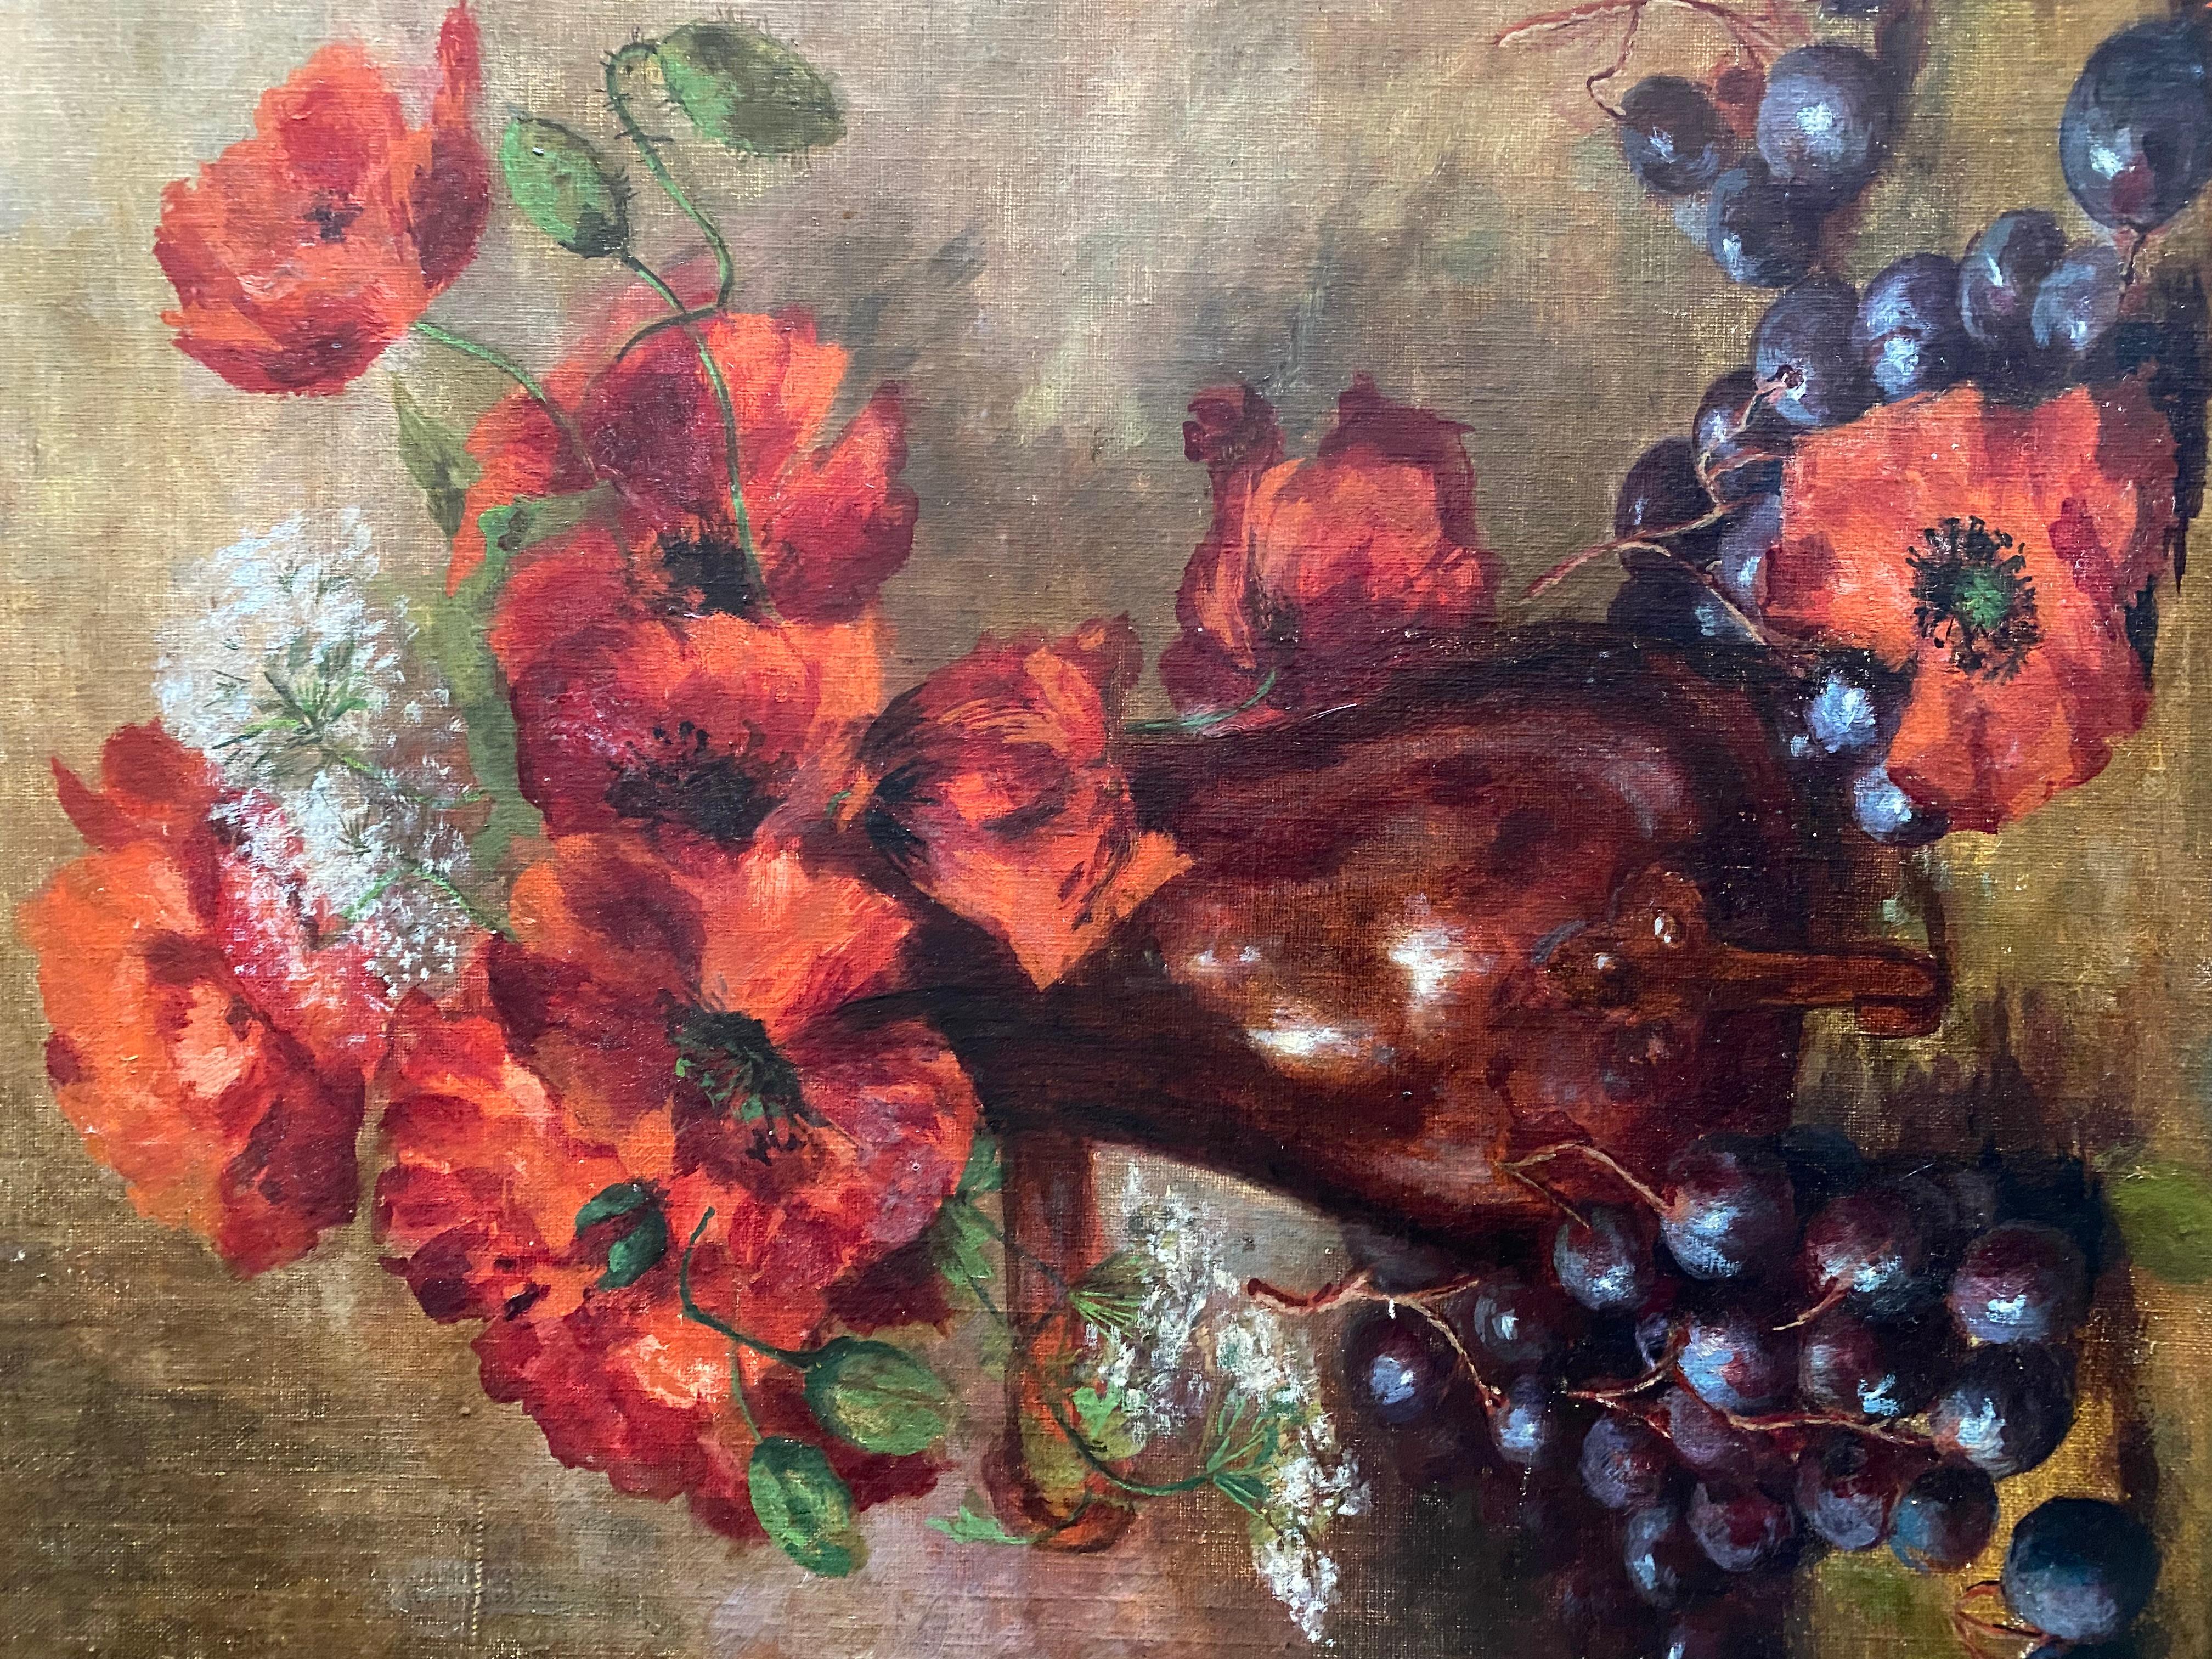 “Red Poppies and Grapes” - Academic Painting by Unknown